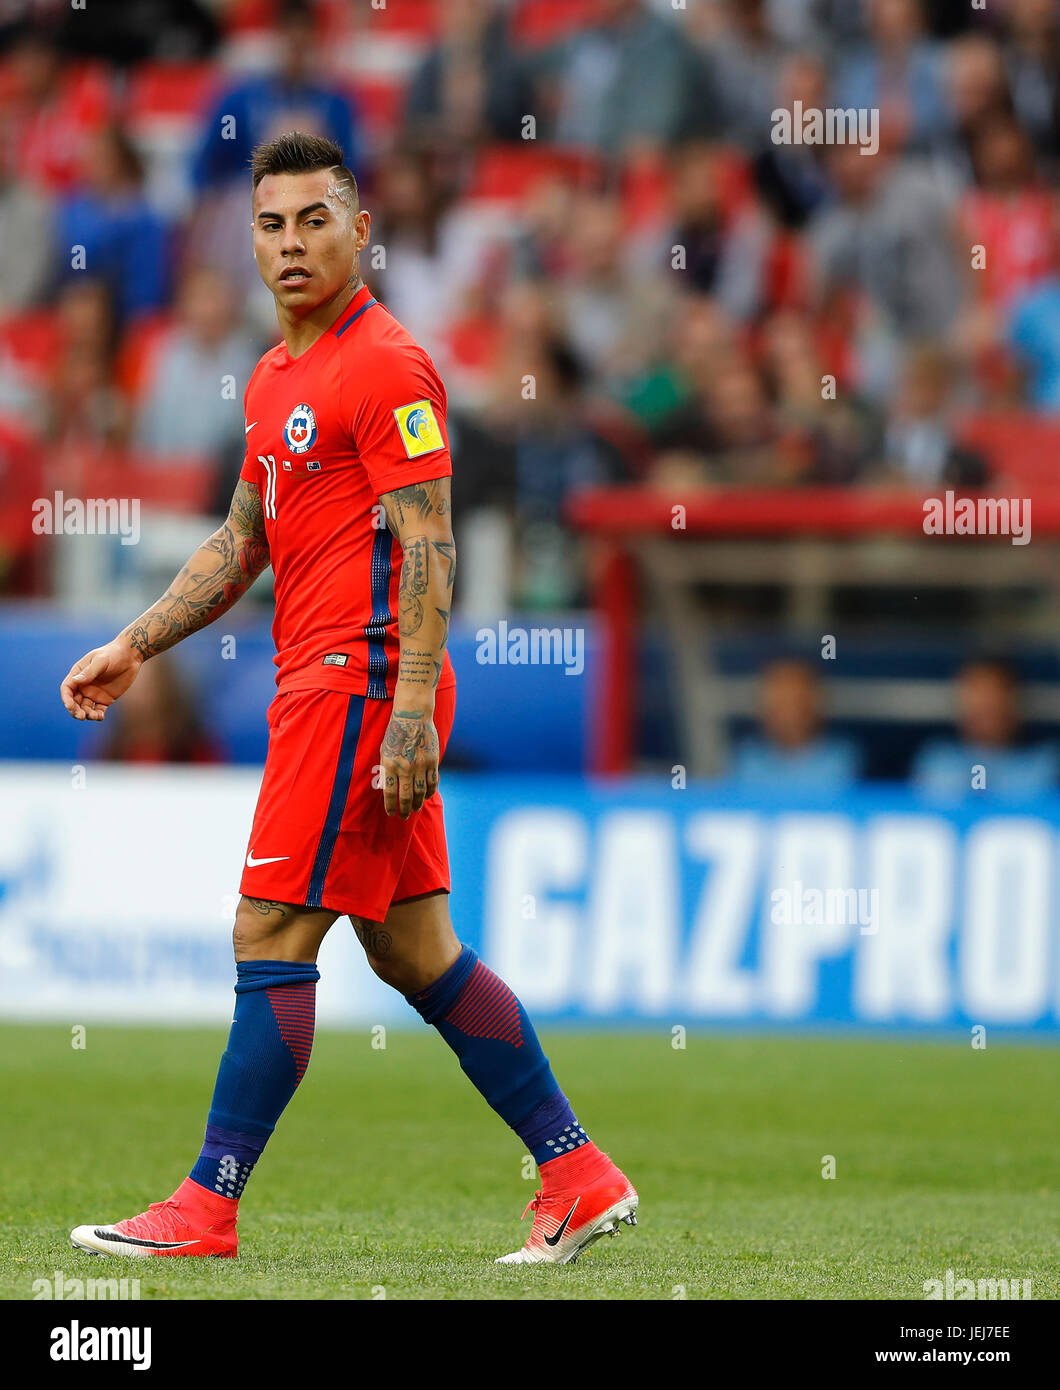 Moscow, Russia. 25th Jun, 2017. Eduardo VARGAS of Chile during a match between Chile and Australia valid for the third round of the Confederations Cup 2017, this Sunday (25), held at the Spartak Stadium (Otkrytie Arena) in Moscow, Russia. Credit: Foto Arena LTDA/Alamy Live News Stock Photo